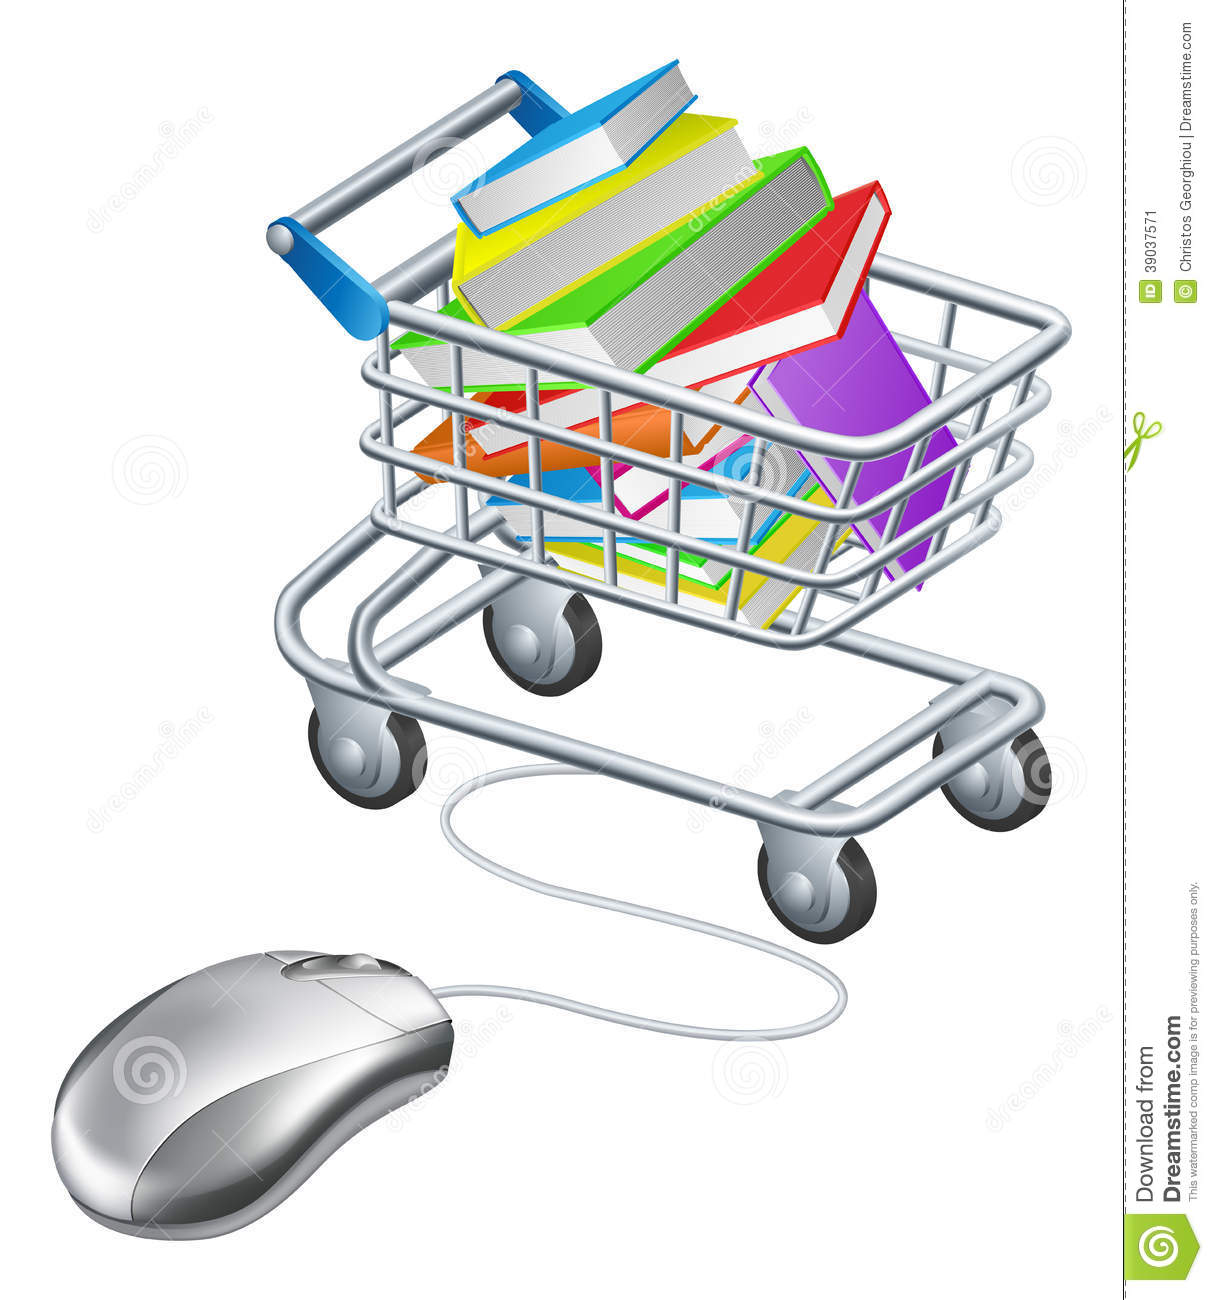 Concept For Online Education Or Shopping For Books On The Internet